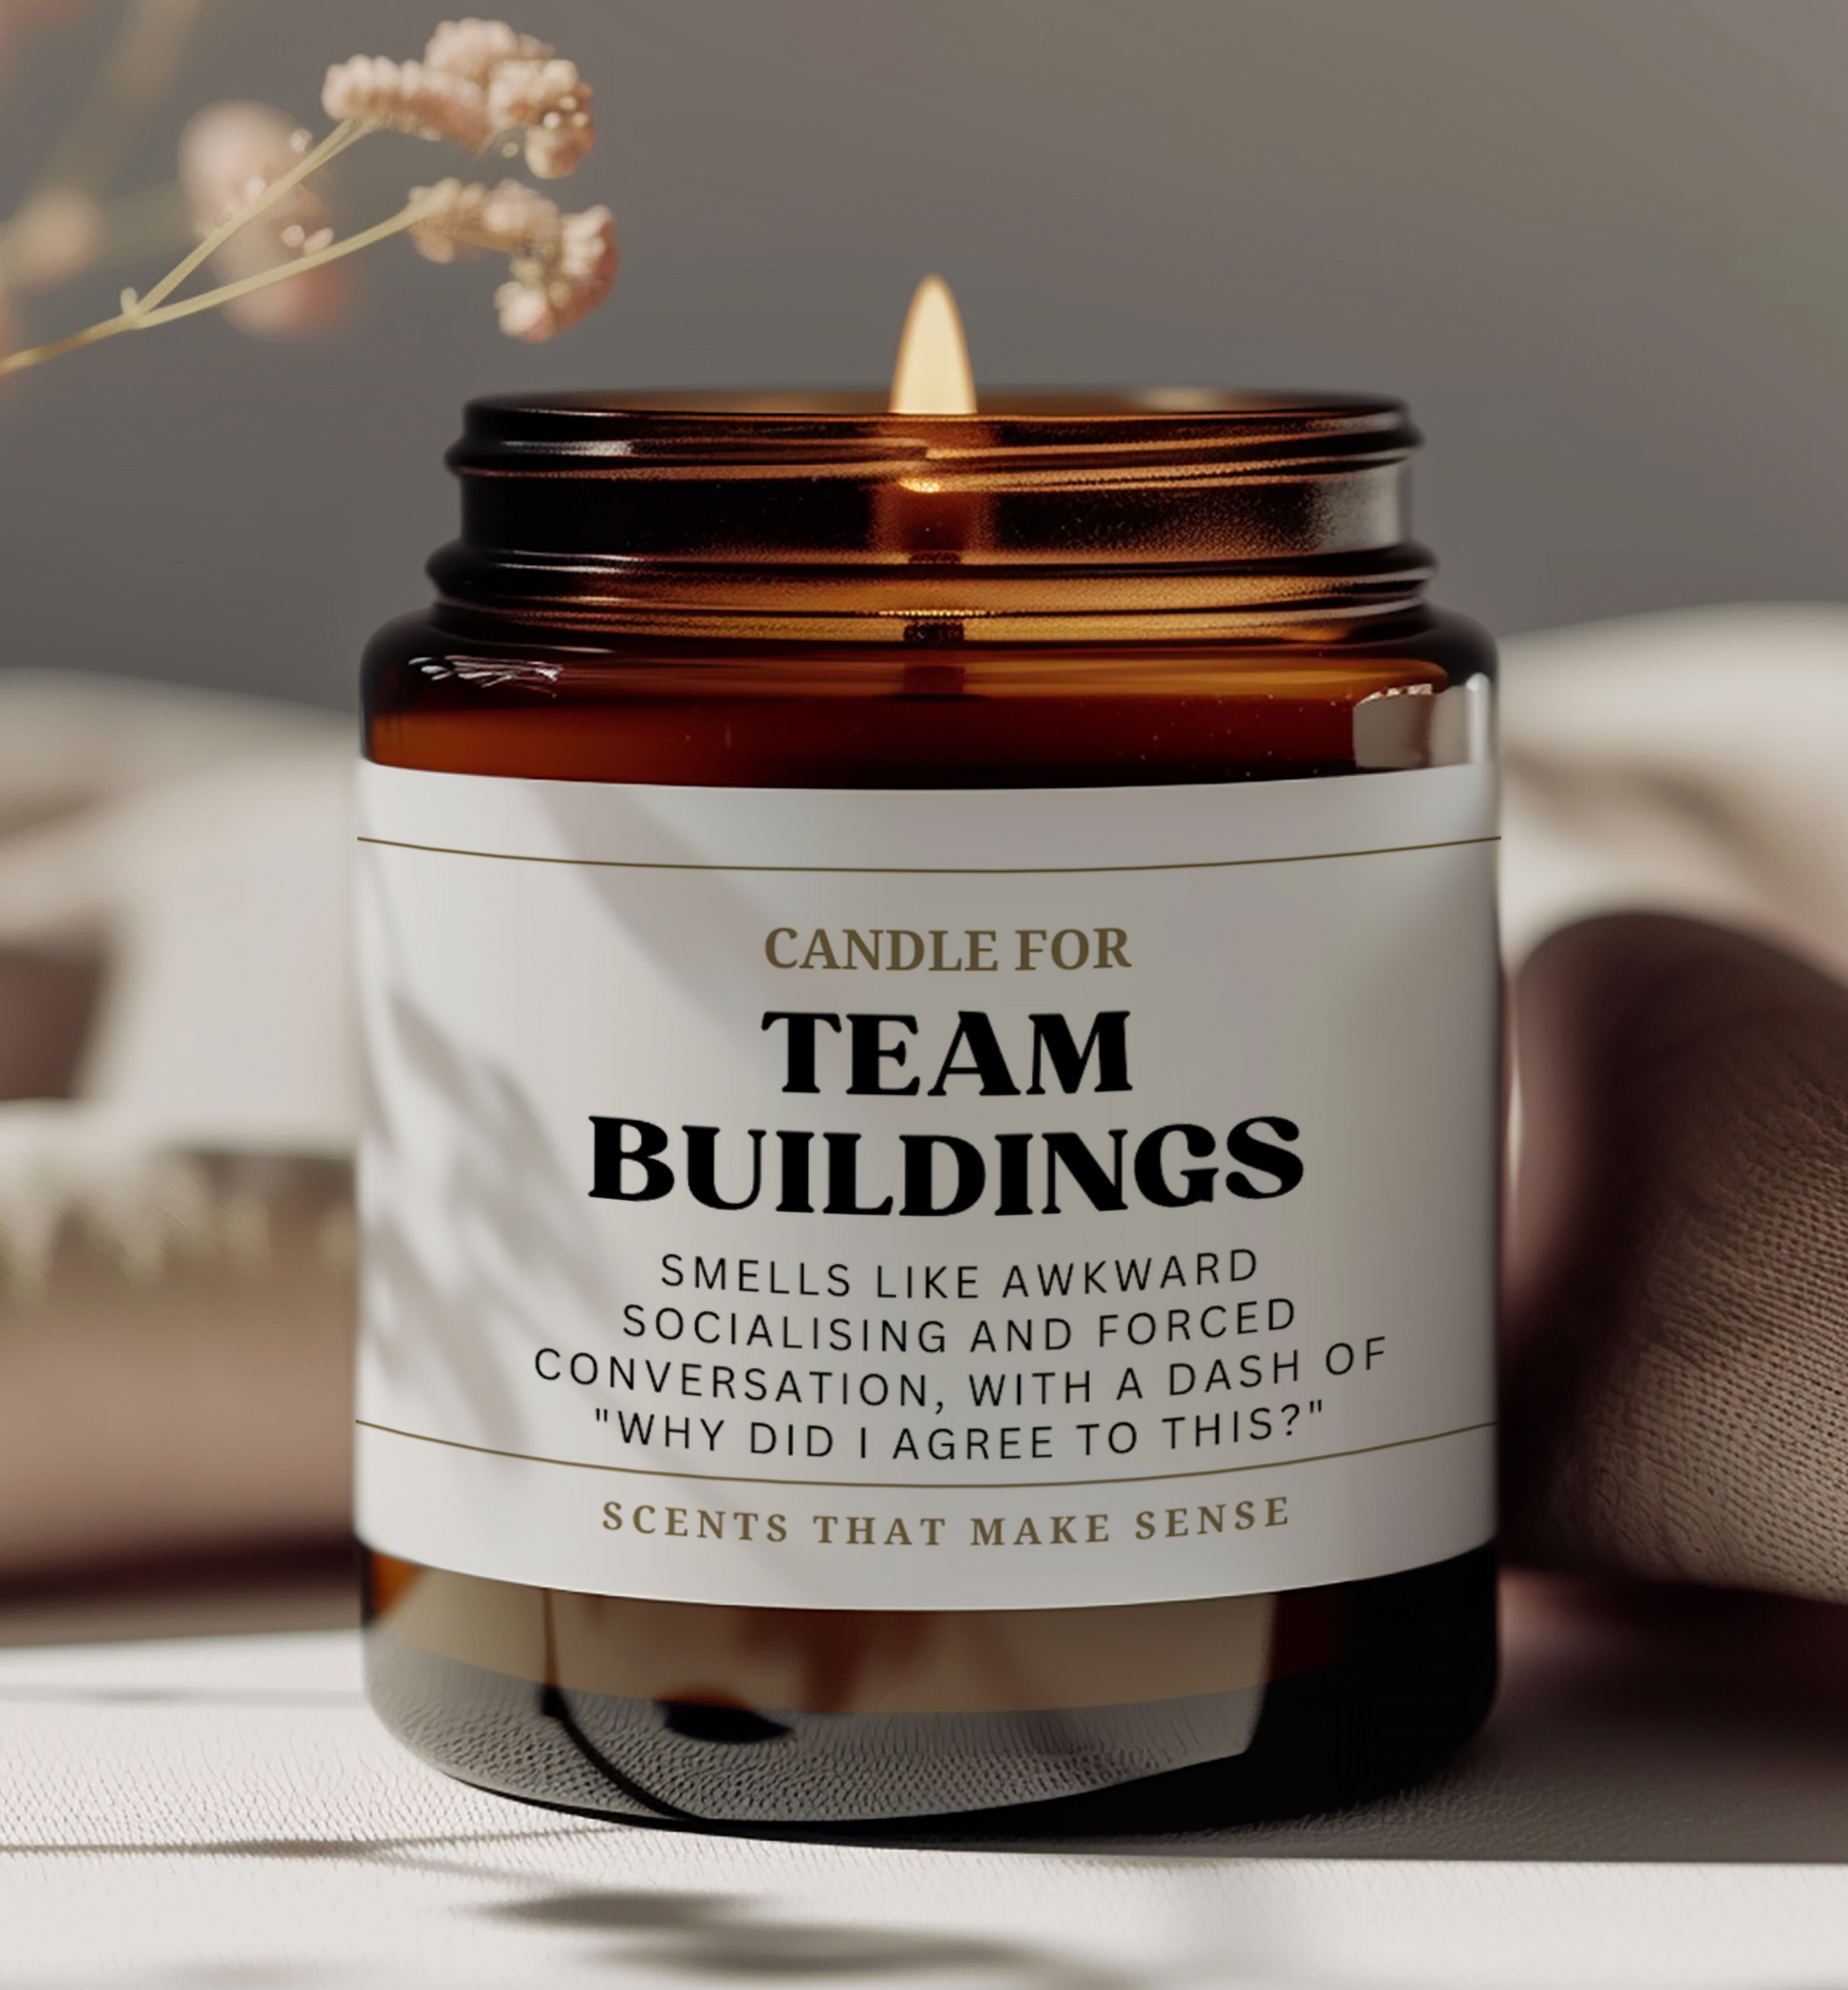 colleague gift birthday gift idea funny candle the label reads candle  for team buildings smells like awkward socialising and forced conversation with a dash of why did I agree to this